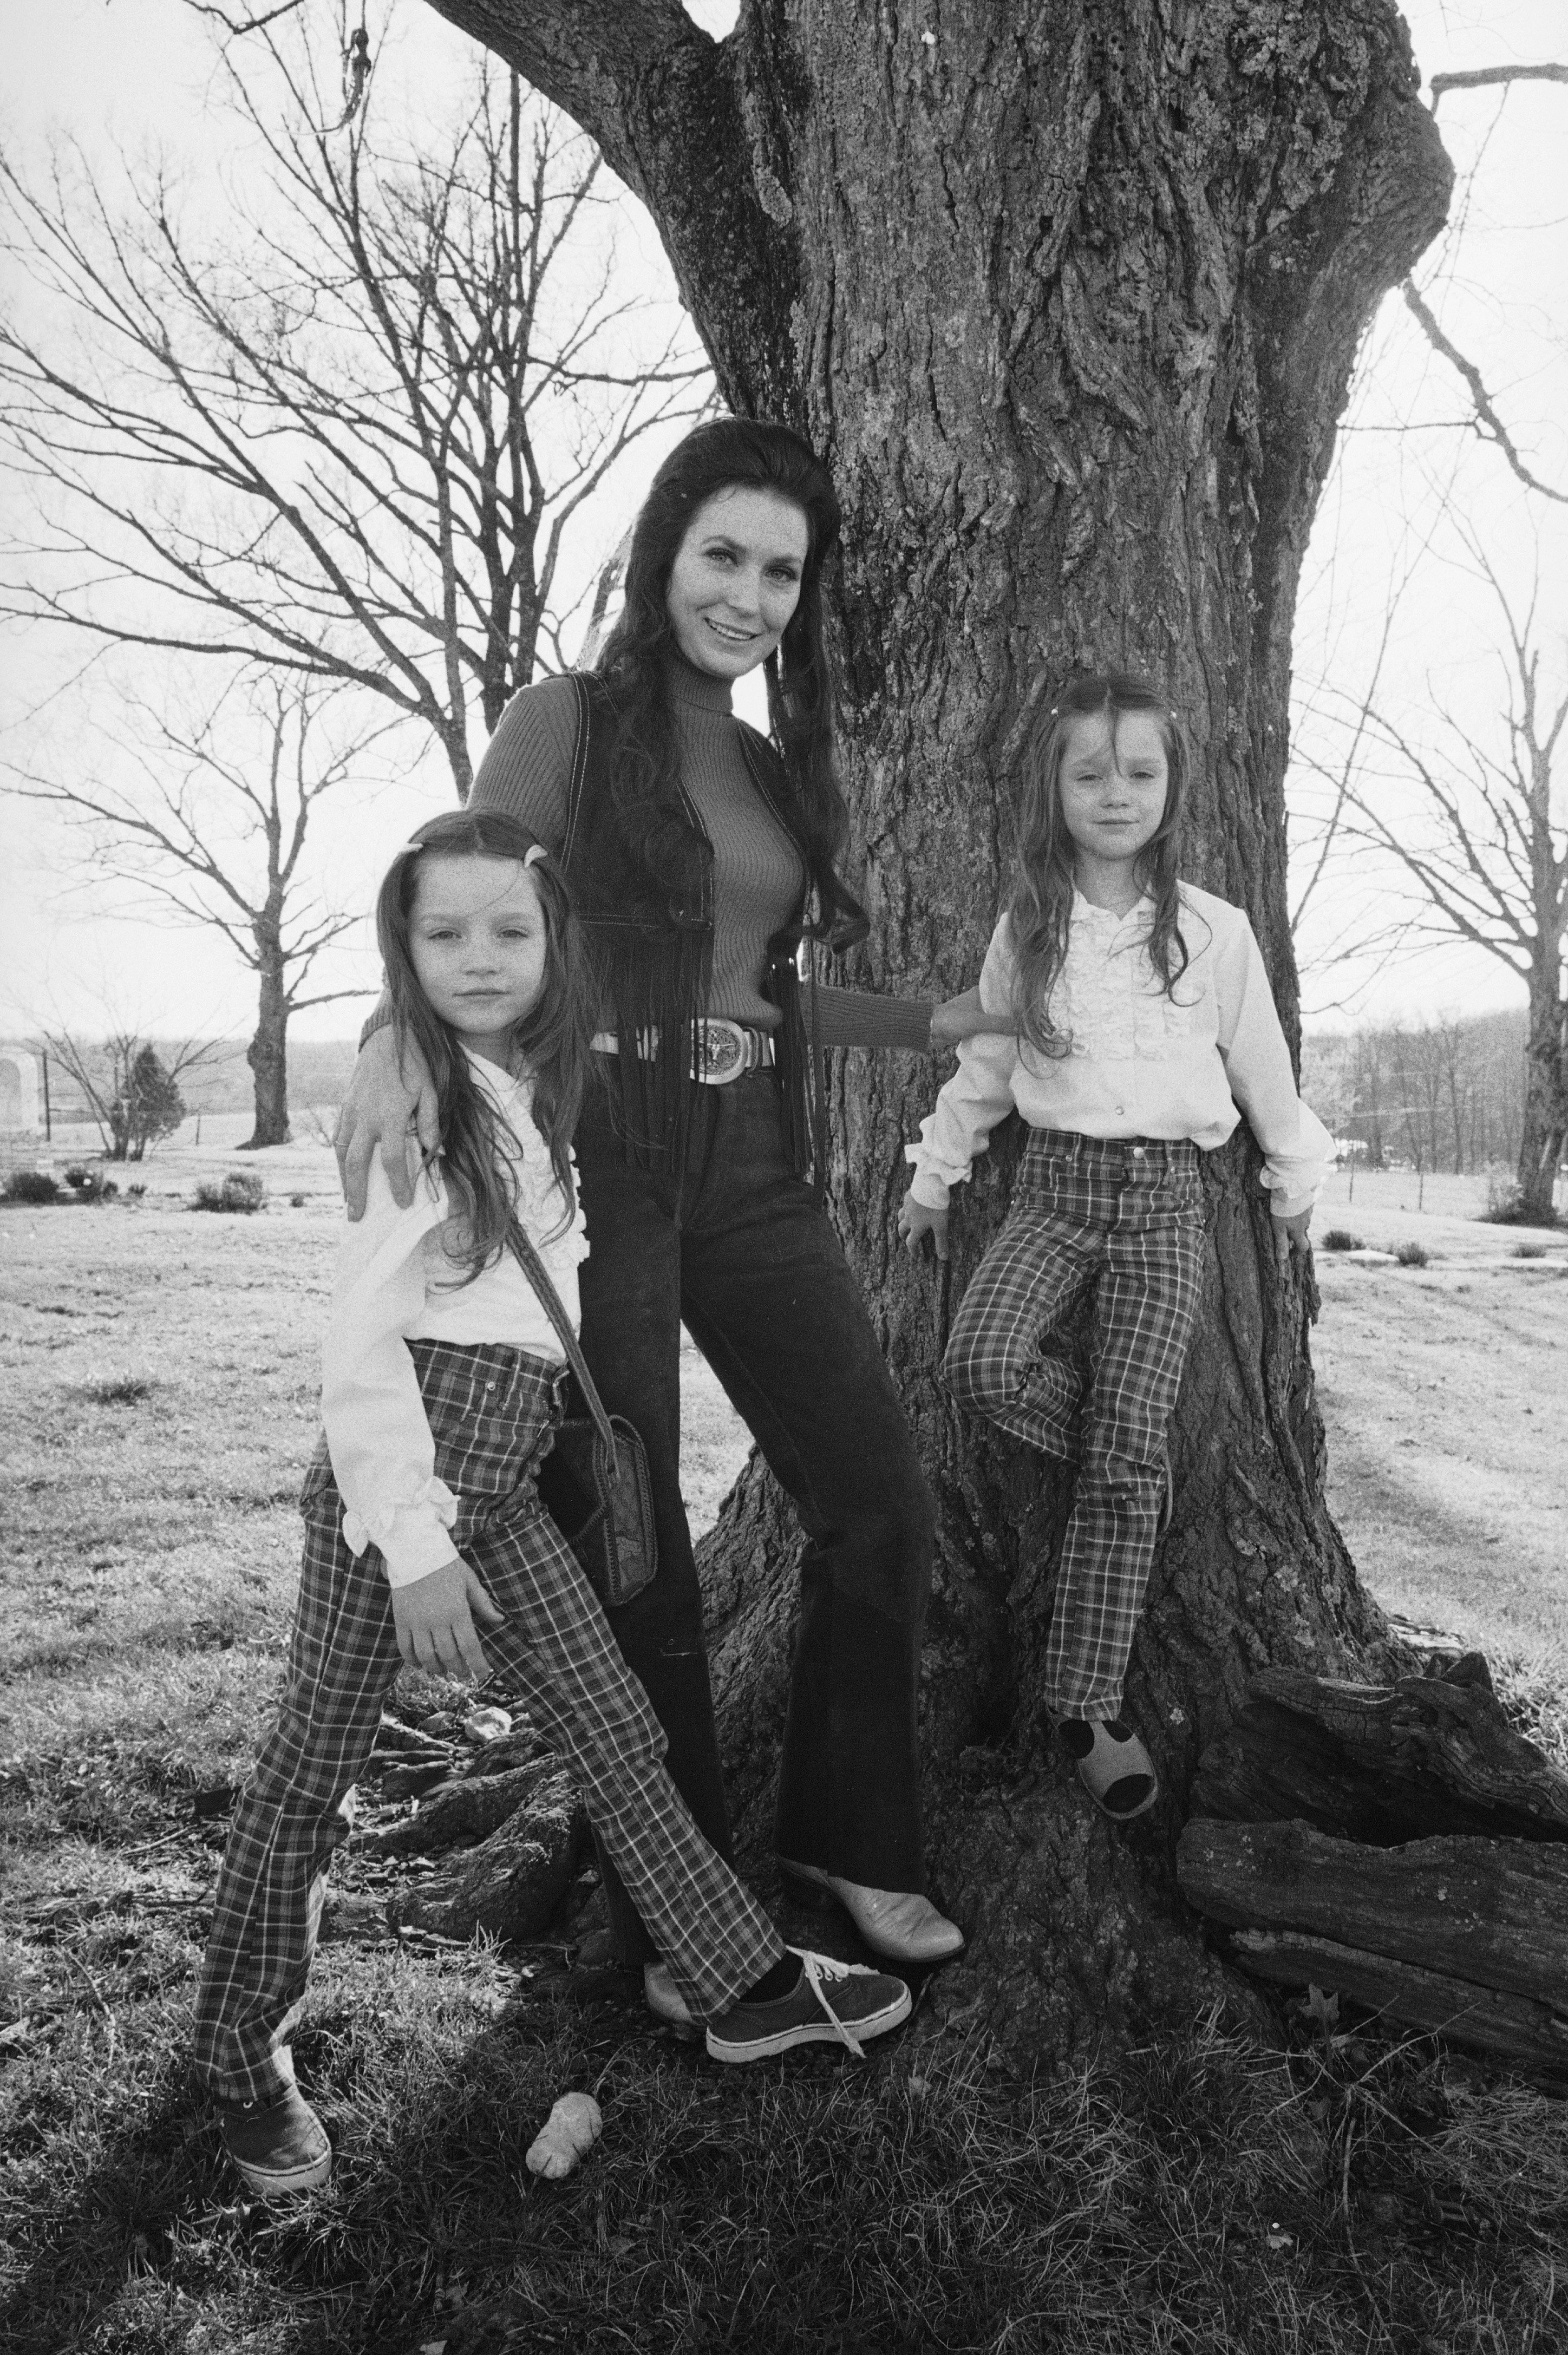 Loretta Lynn poses with her twin daughters Peggy and Patsy in March 1972 in Hurricane Mills, Tennessee | Source: Getty Images